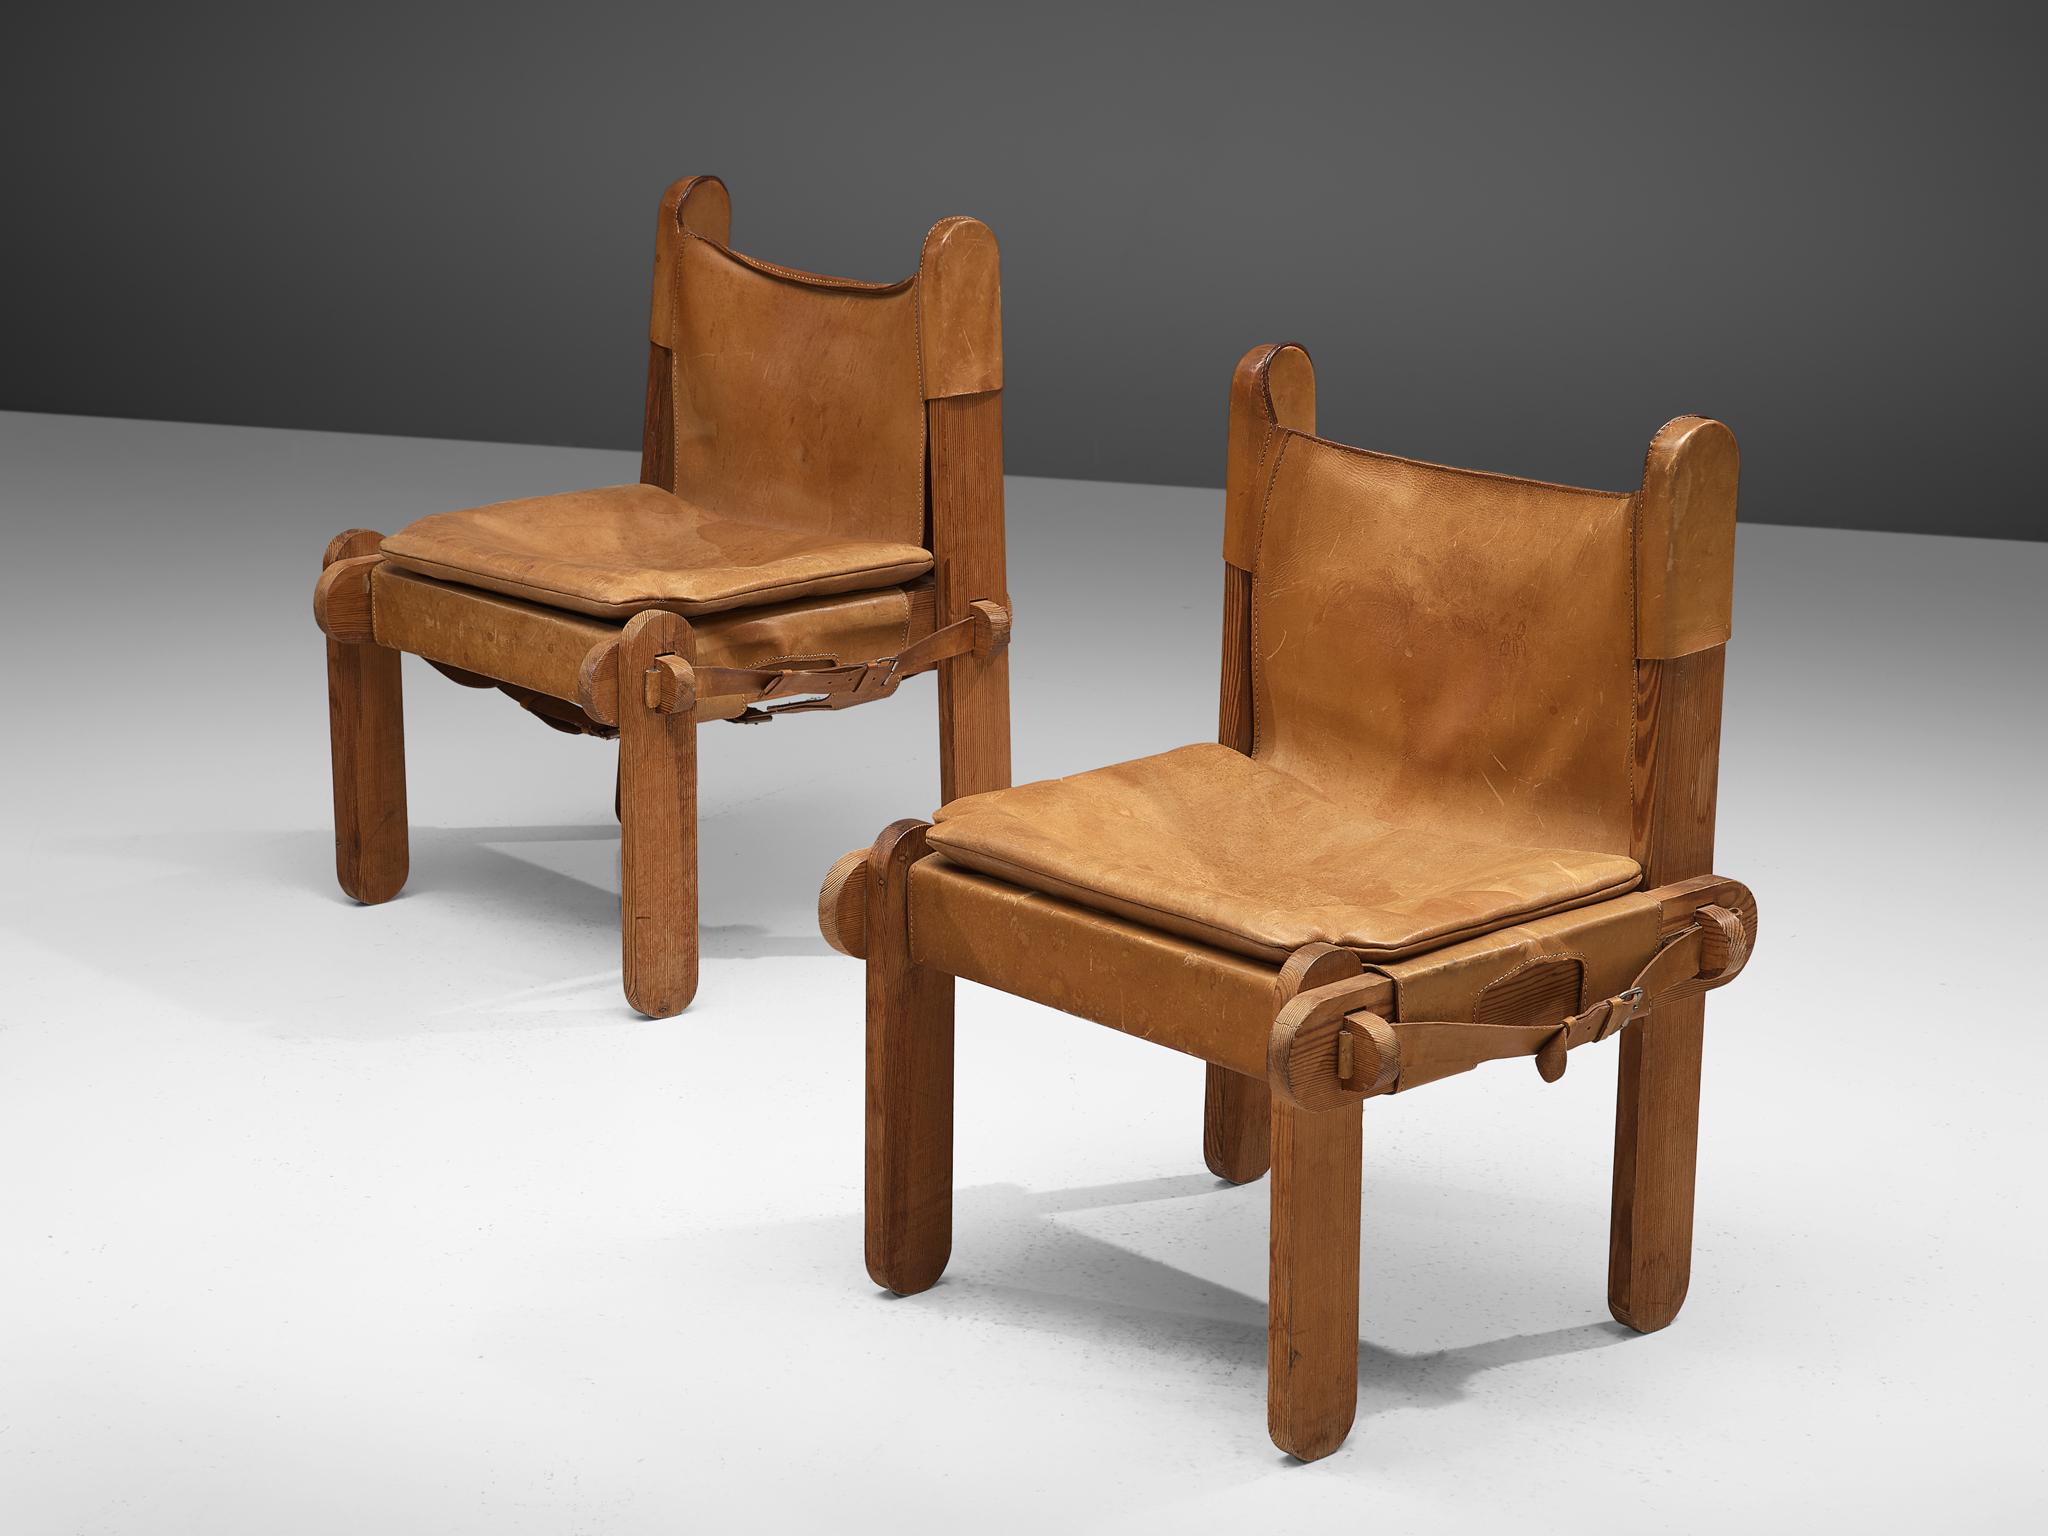 Side chairs, leather, pine wood, France, 1950s.

These easy chairs hold a solid crafted frame with characteristic wooden details/joints. The design is original and rare and features a completely straight high back and seat. The leather is attached